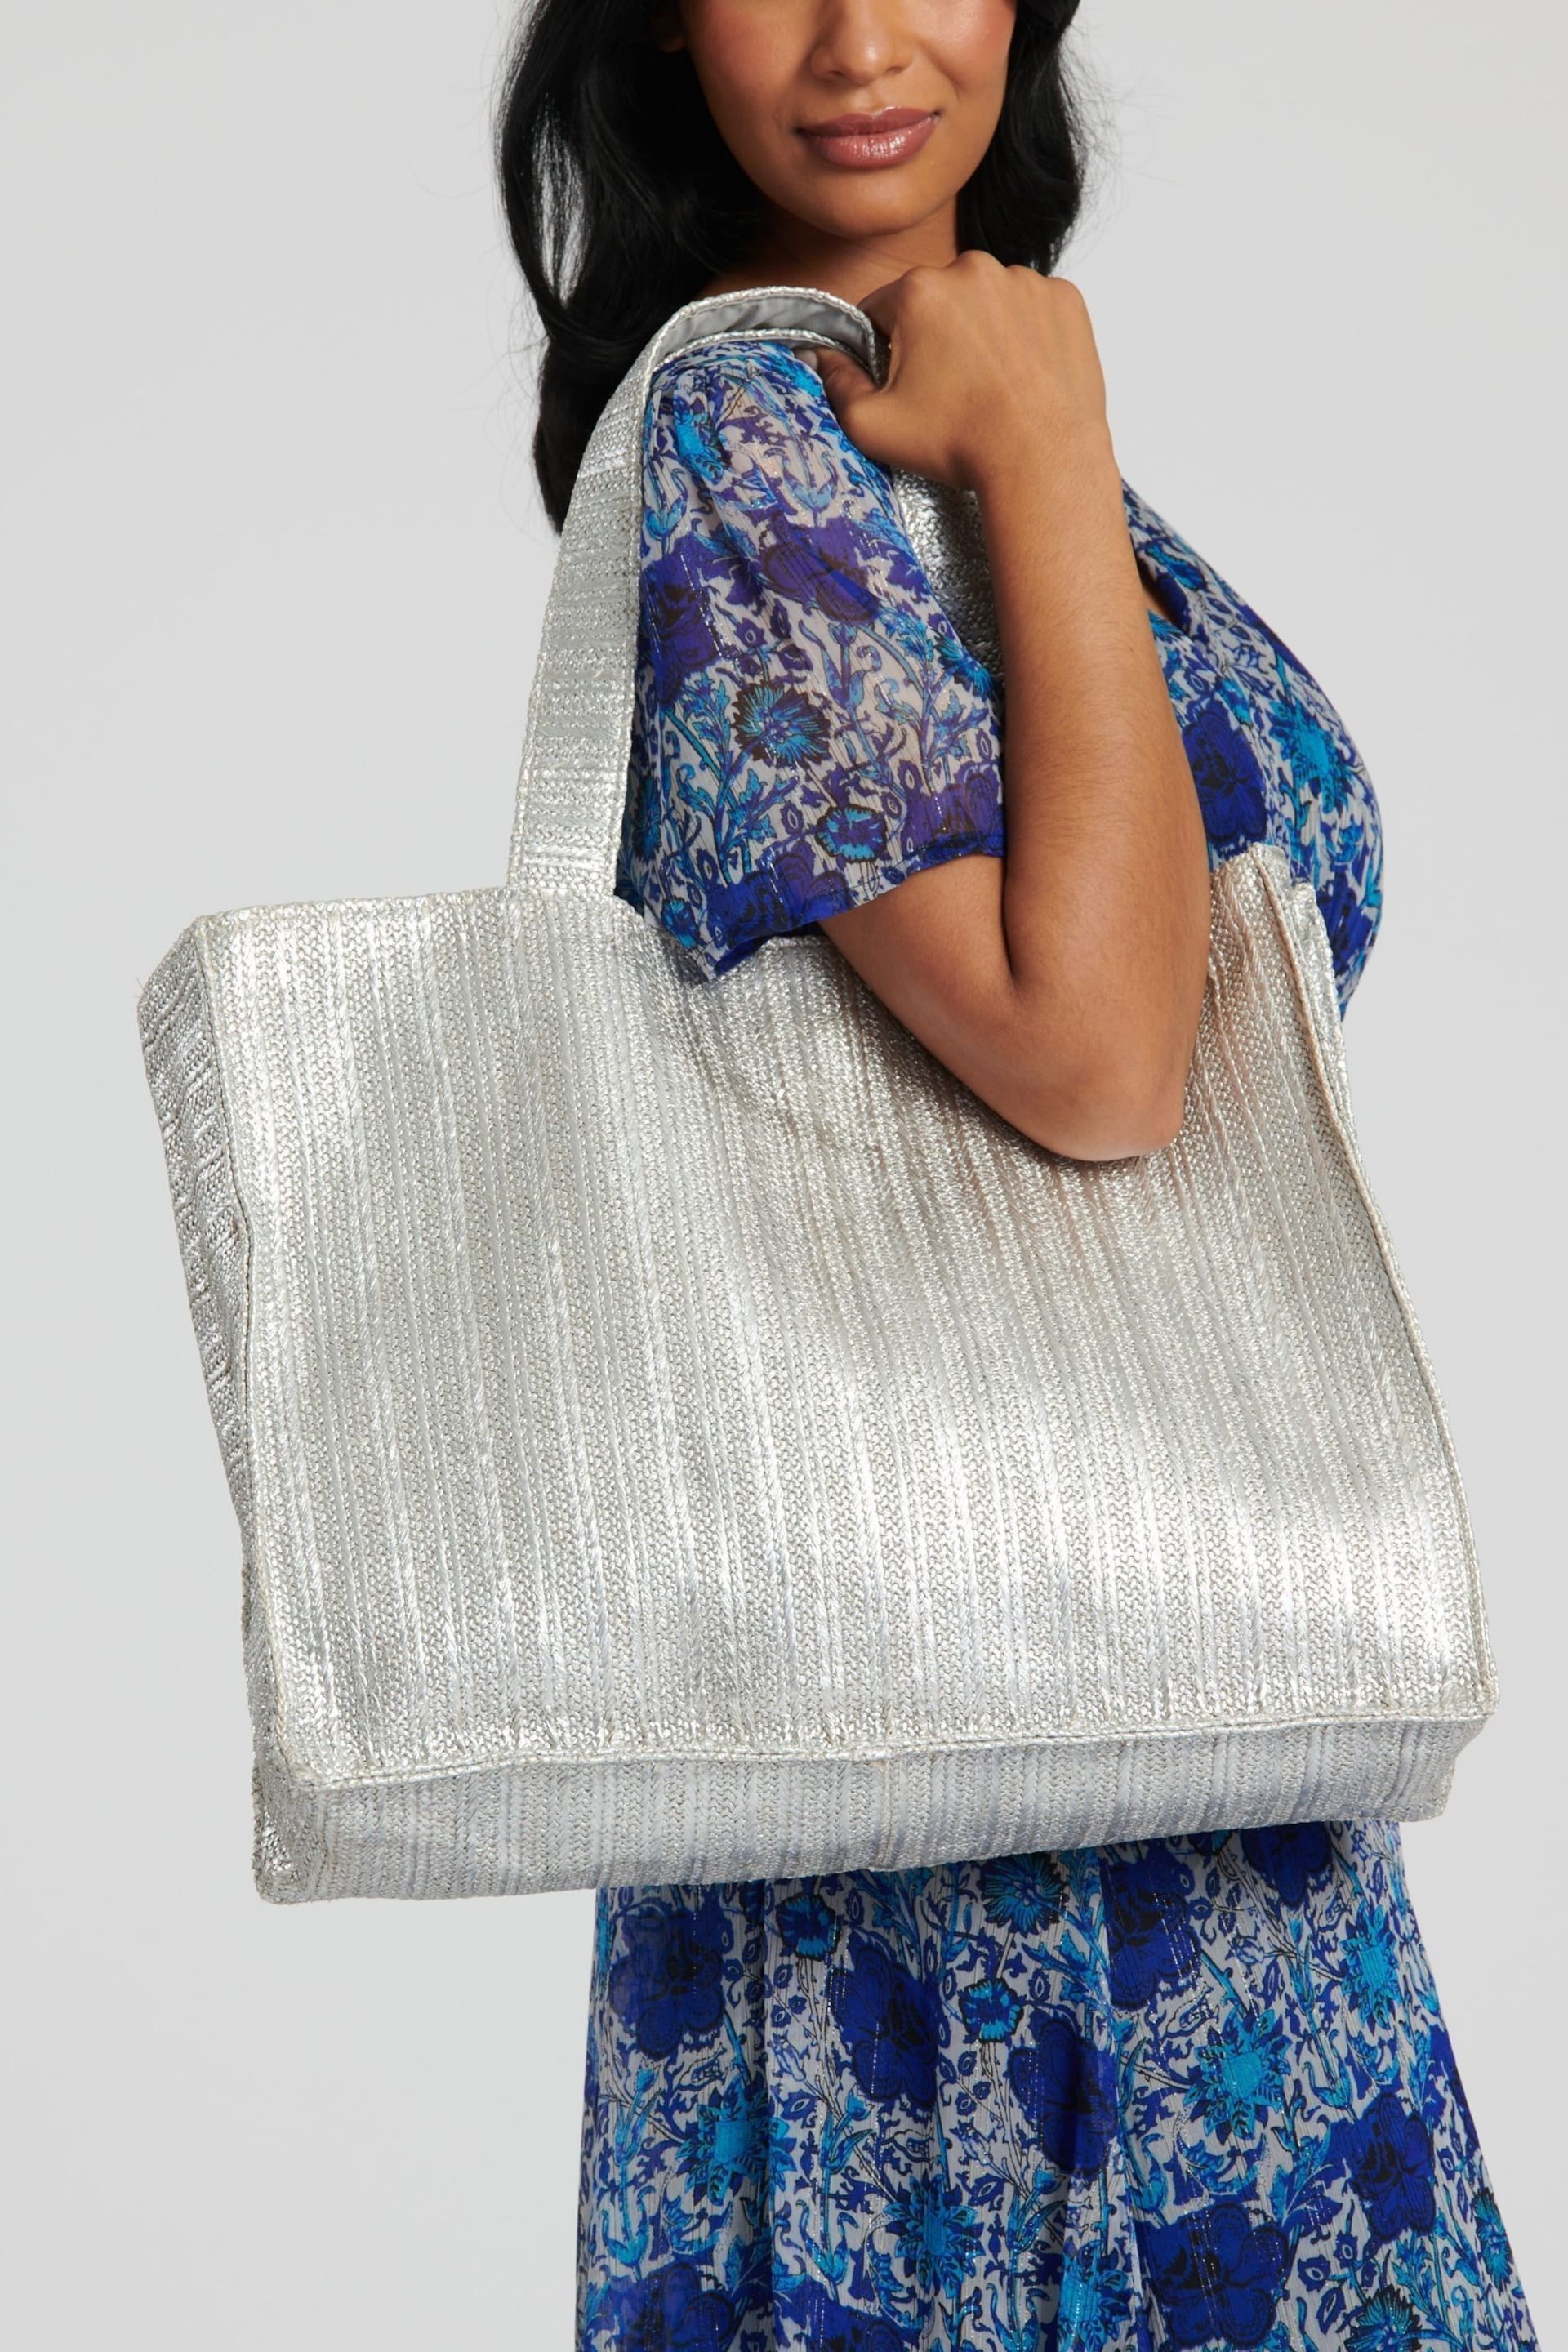 South Beach Silver Woven Shoulder Tote Bag - Image 2 of 3